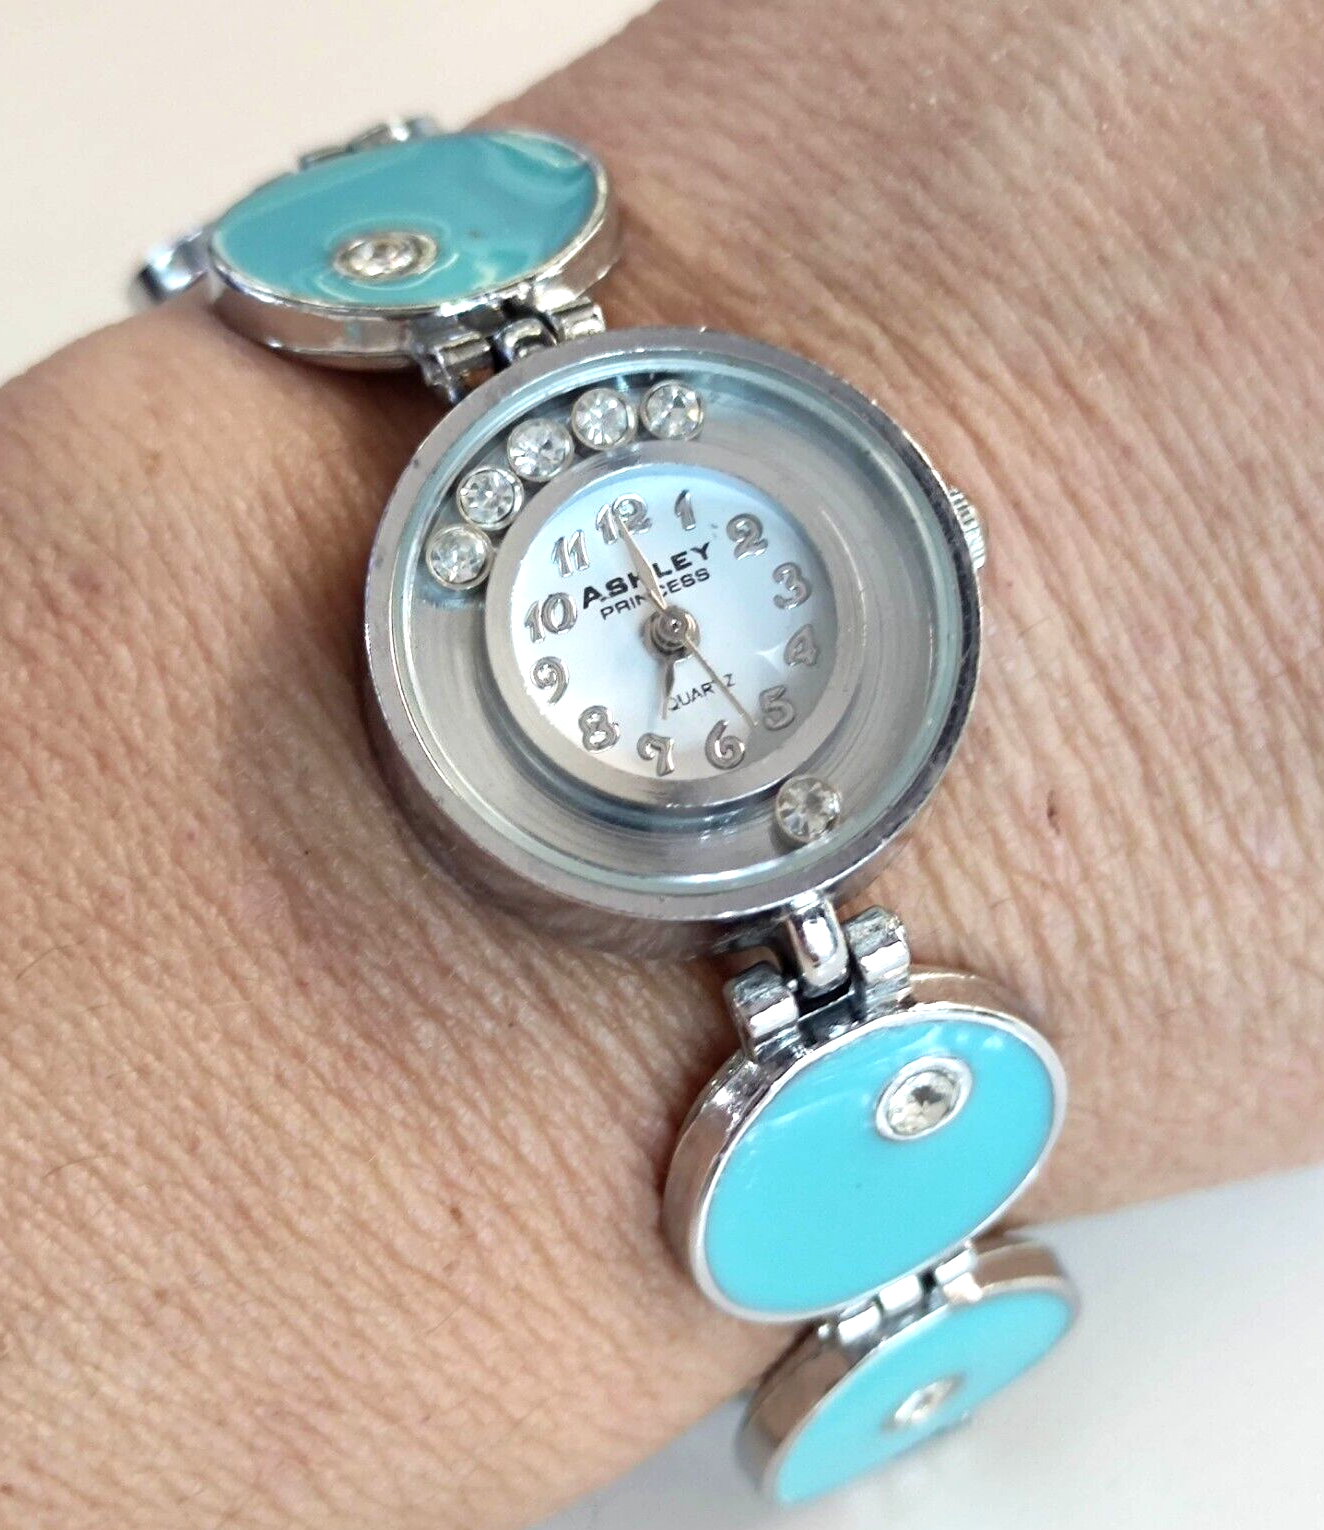 bussy ahmed recommends ashley princess watches pic